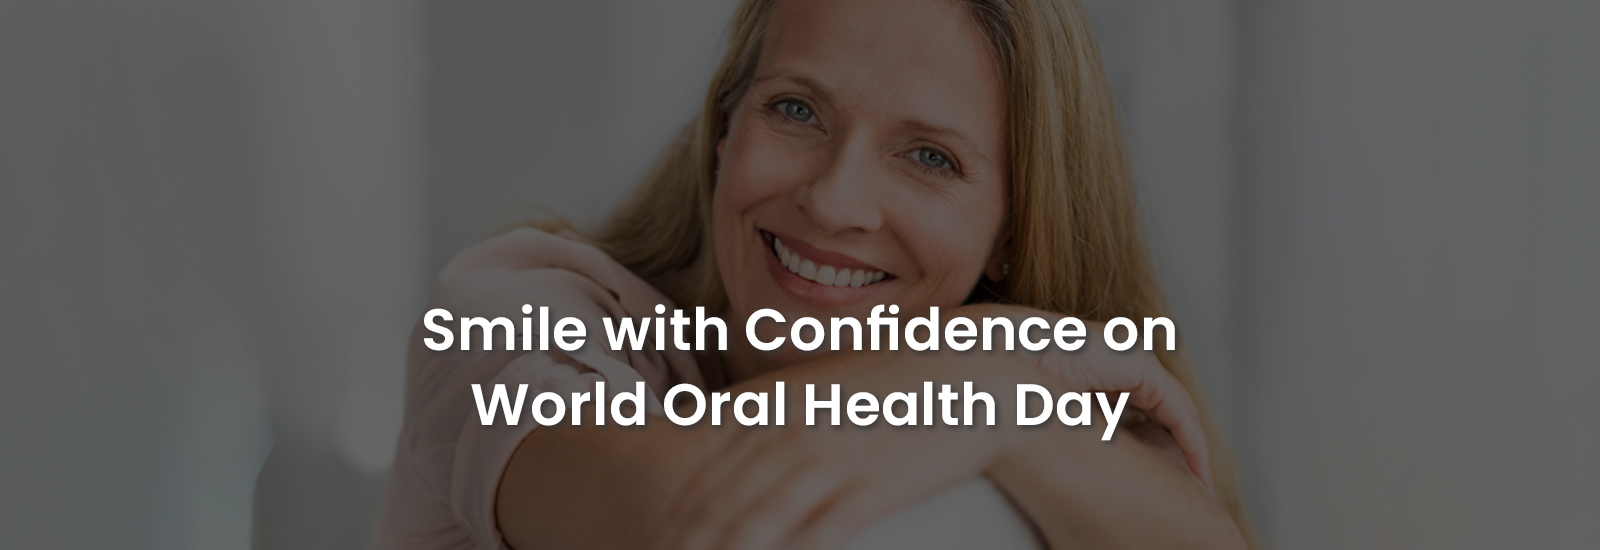 Smile with Confidence on World Oral Health Day | Banner Image